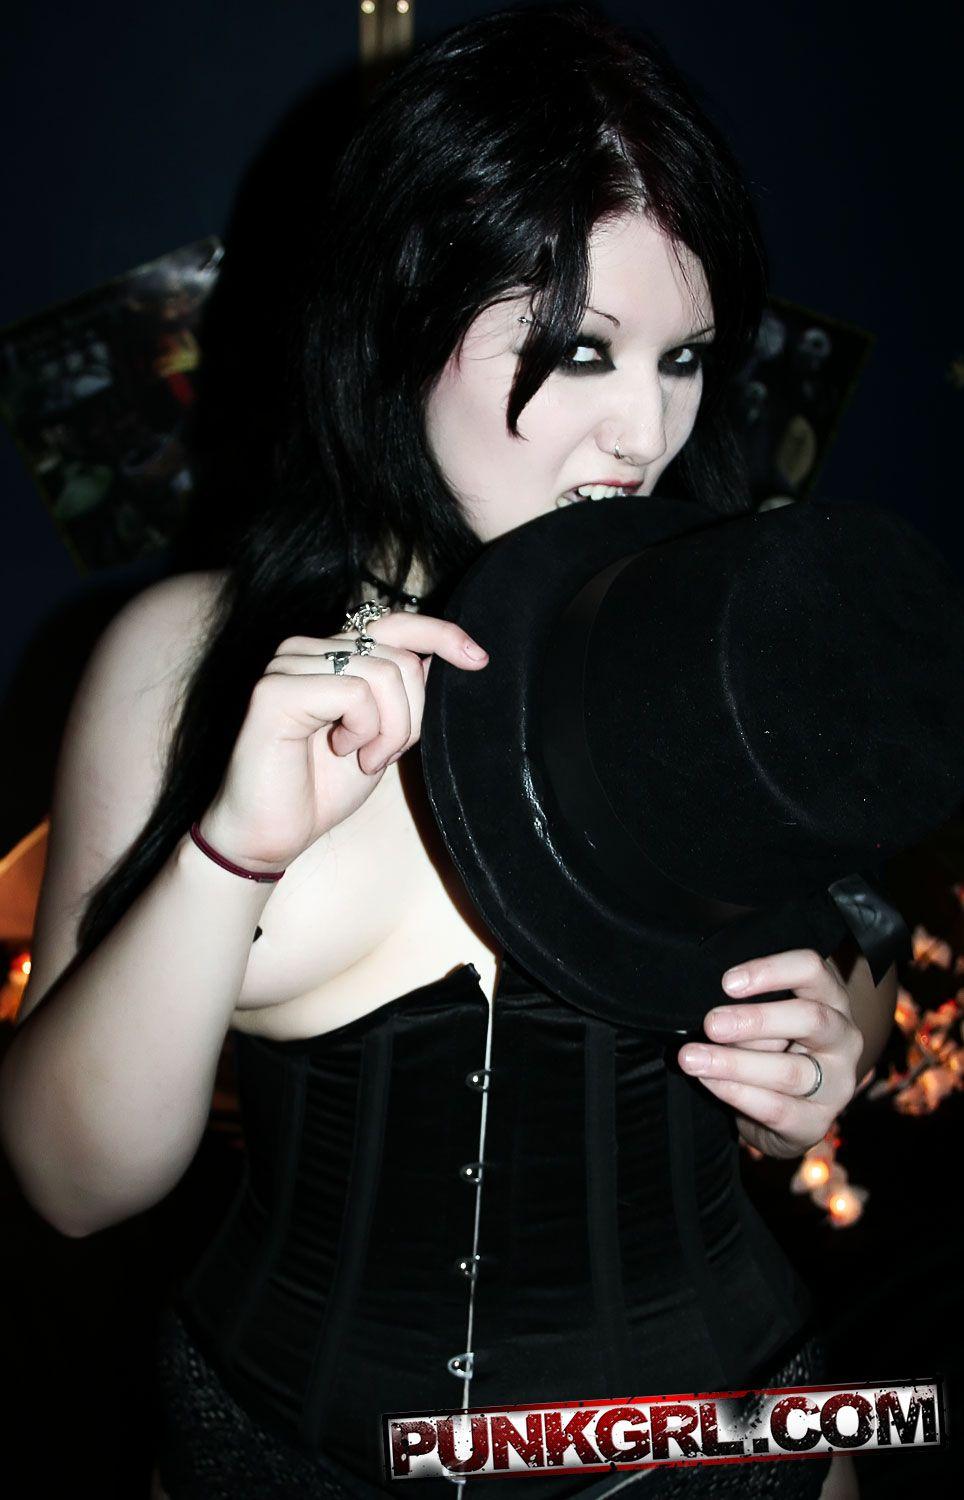 Pictures of goth punk Spook giving you a gothic tease #60764925